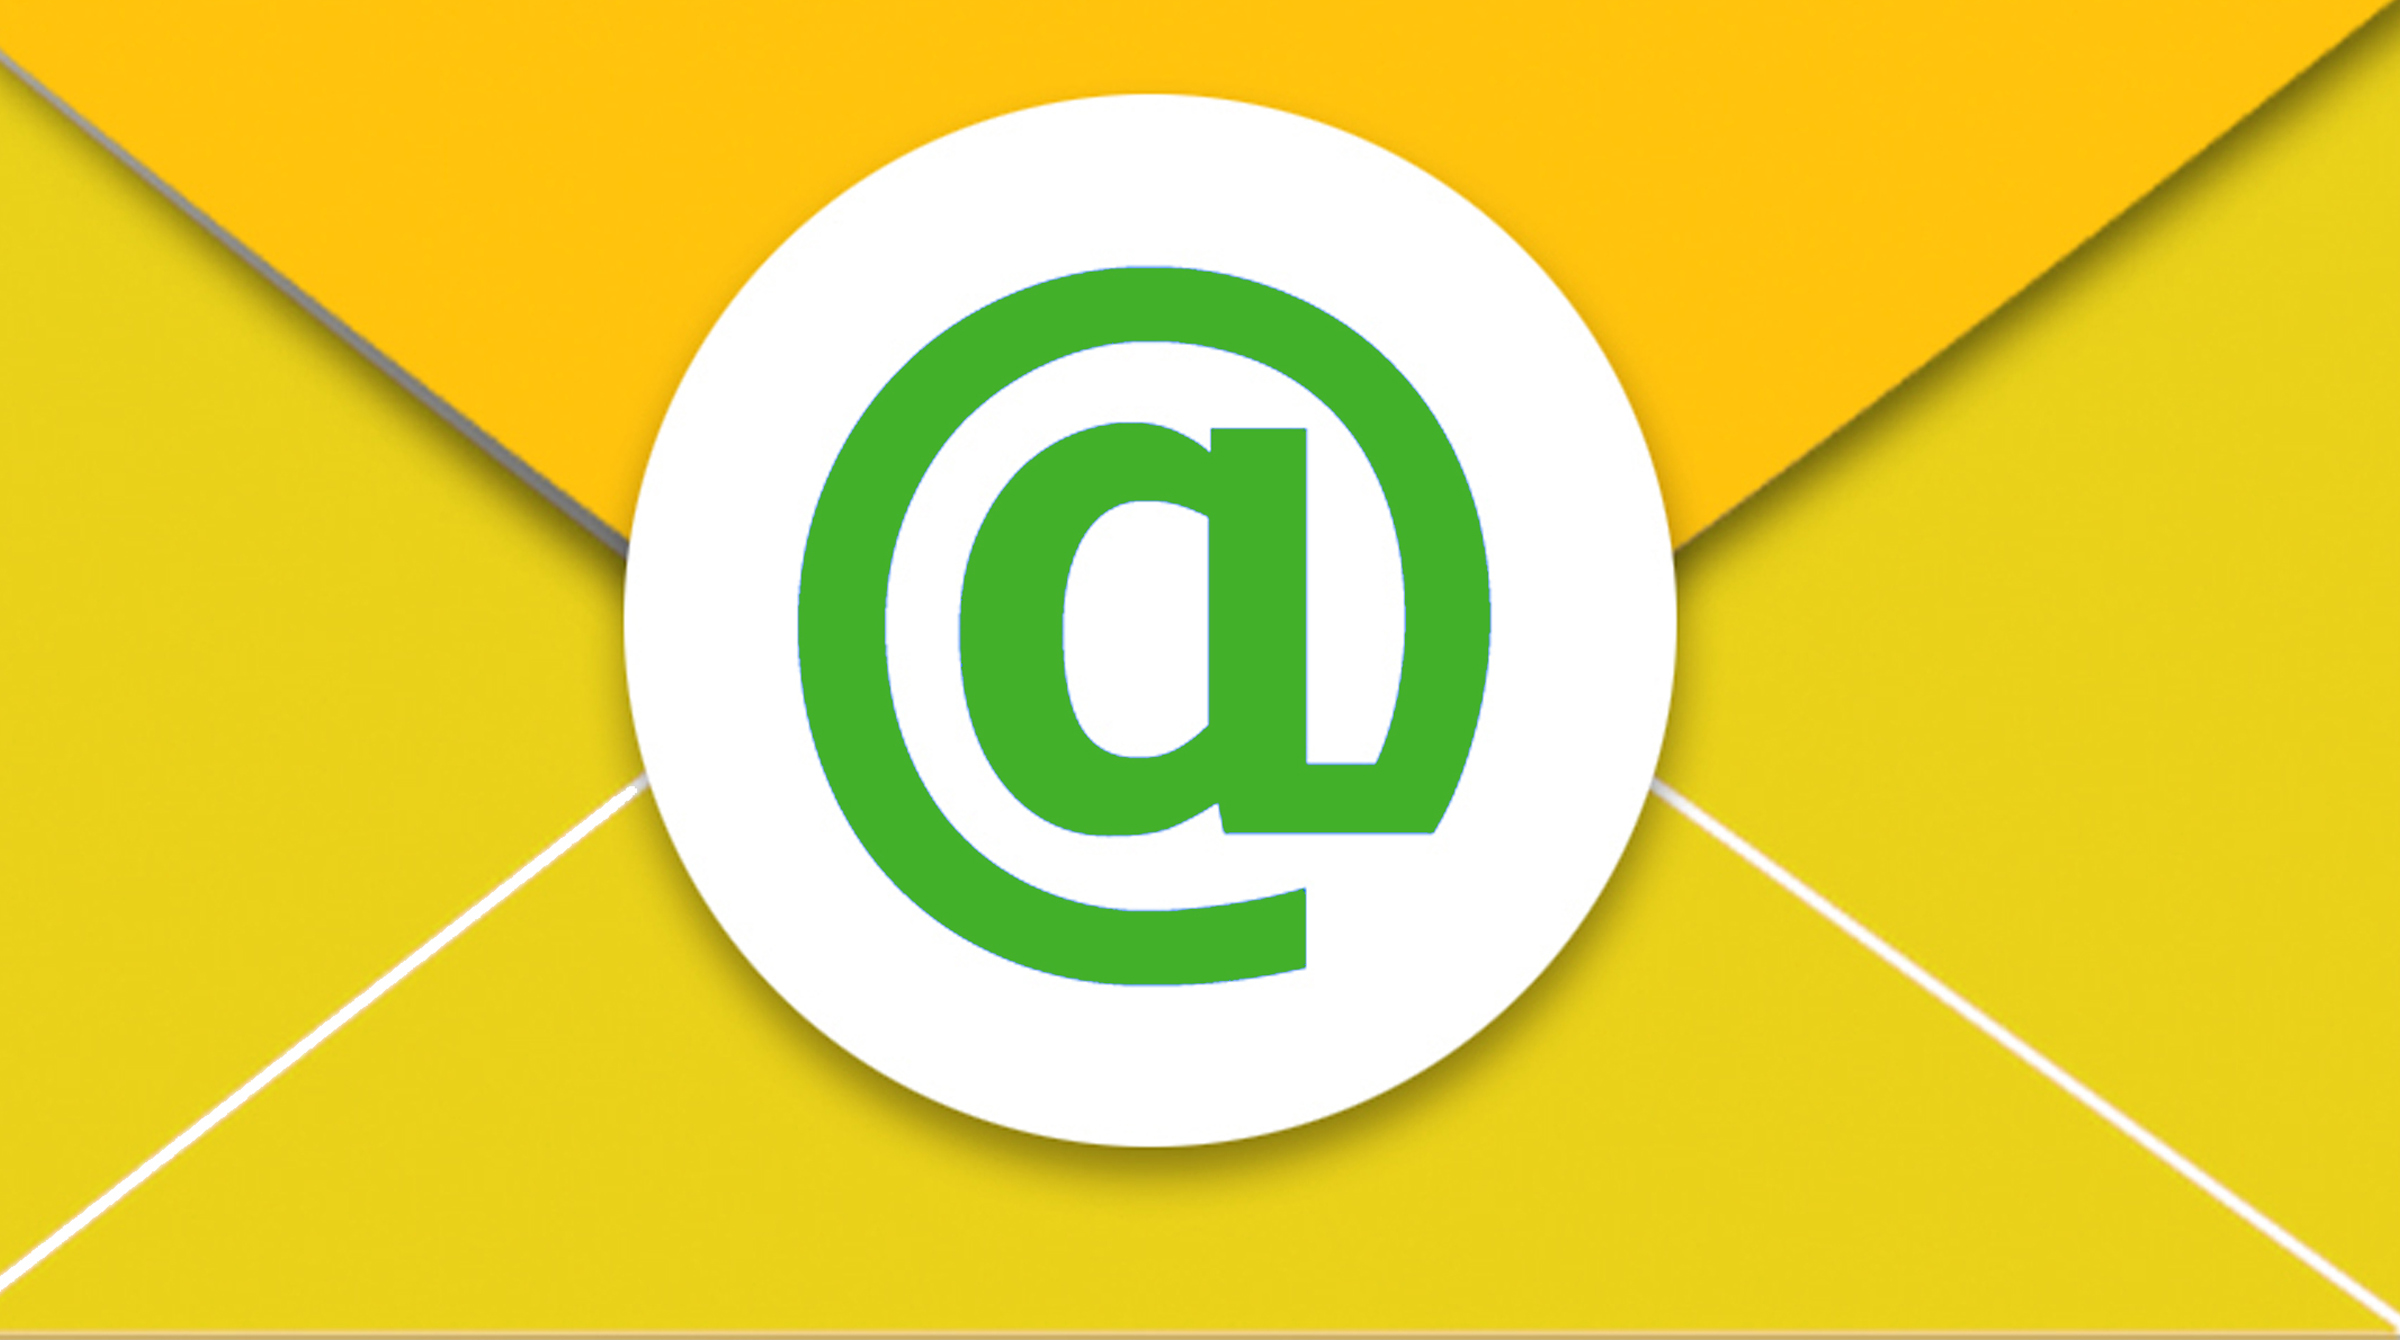 Envelope with email newsletter symbol